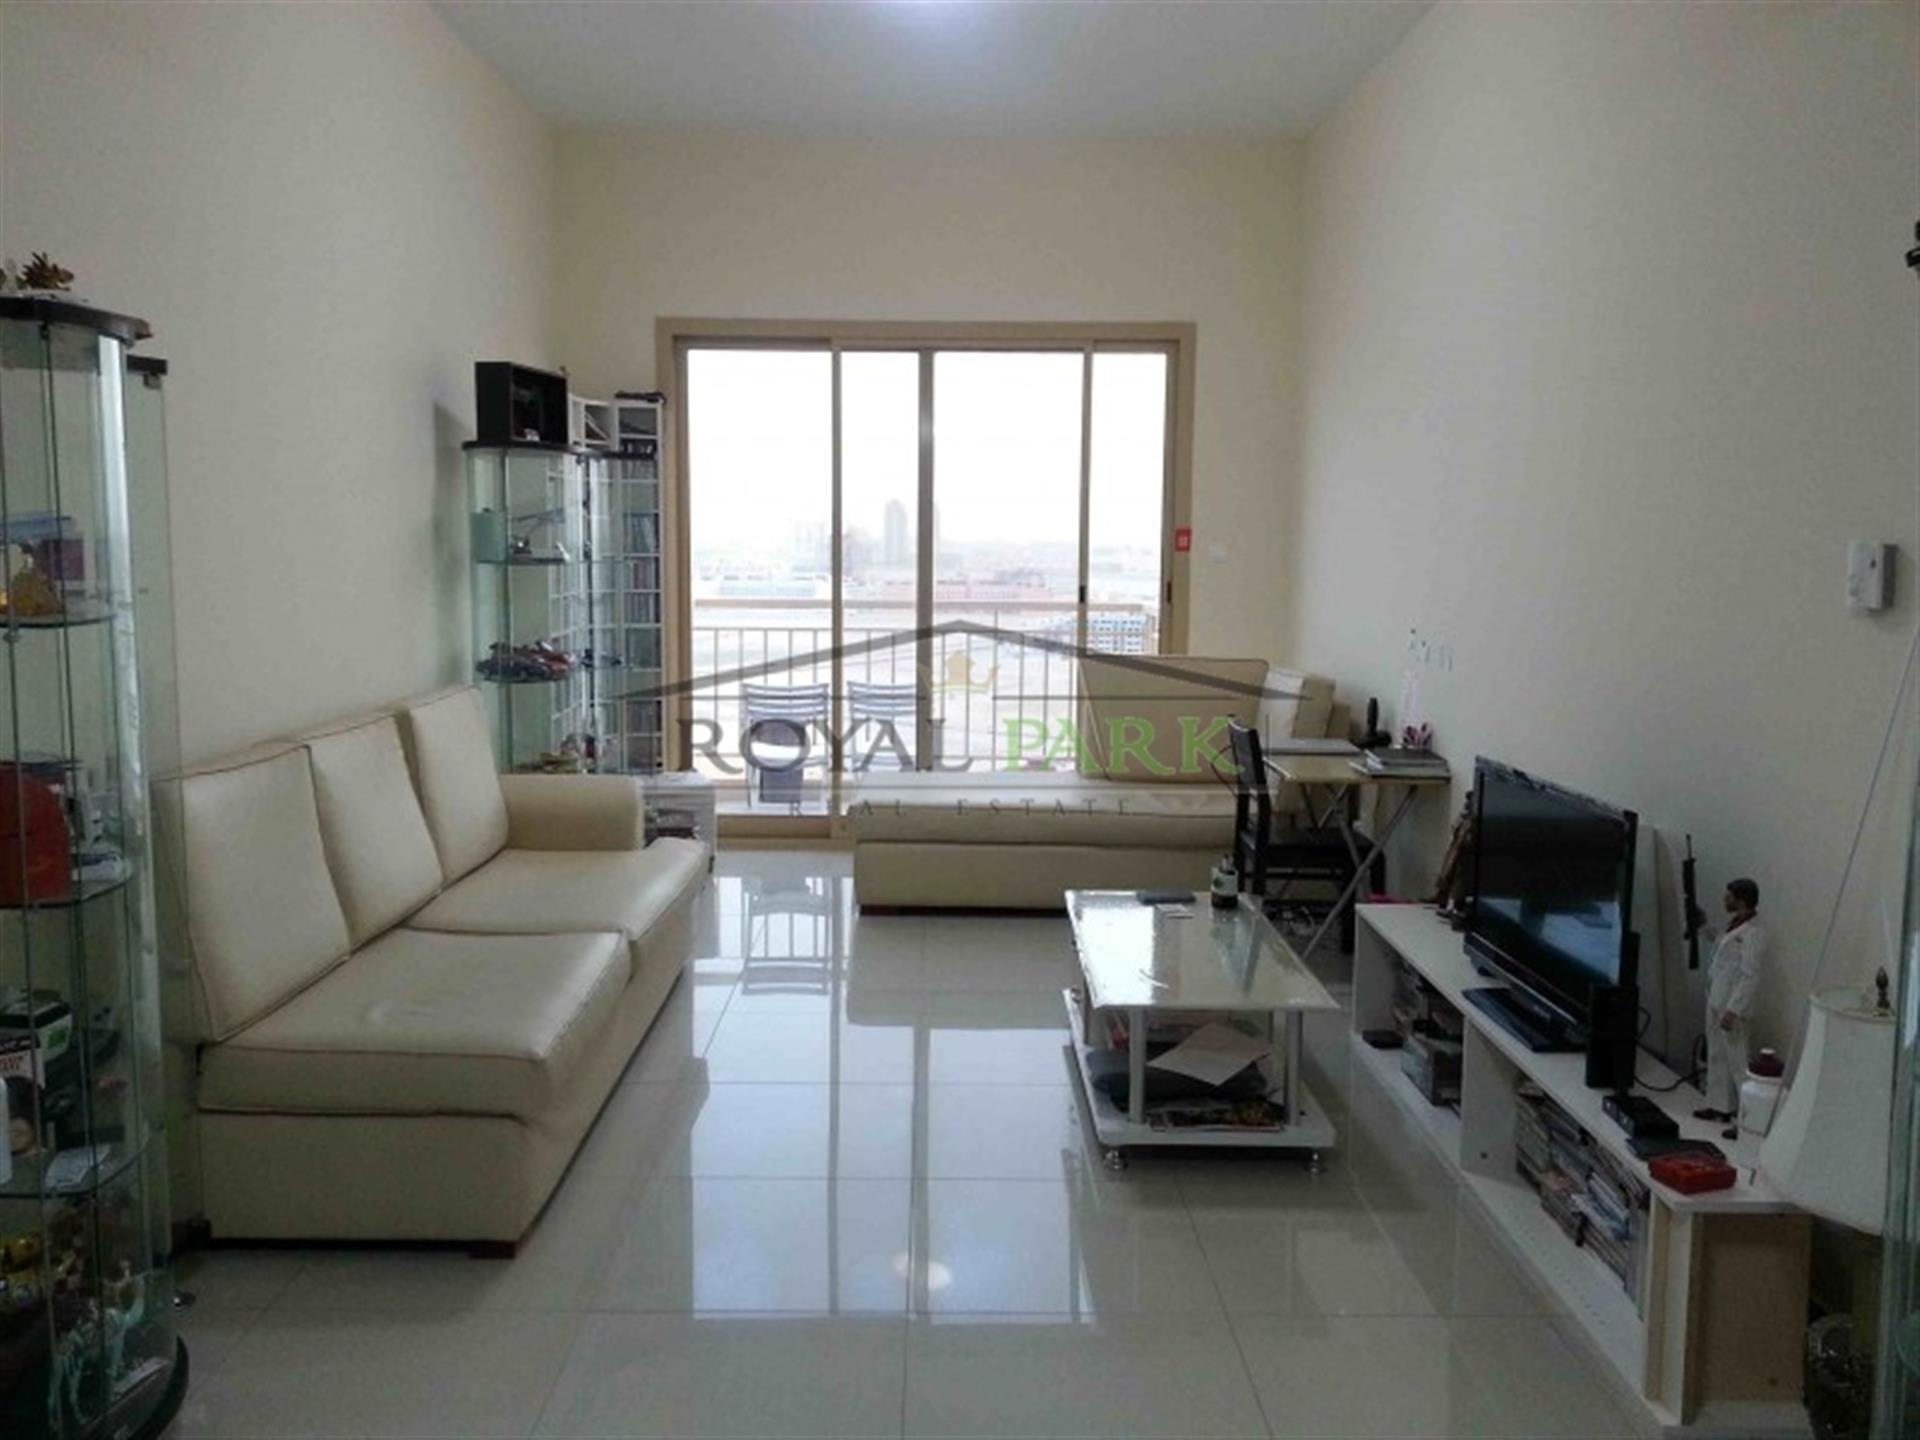 2 B/r Apartment In Manhattan Tower, Jvc, Available For Sale At Aed 1.3m